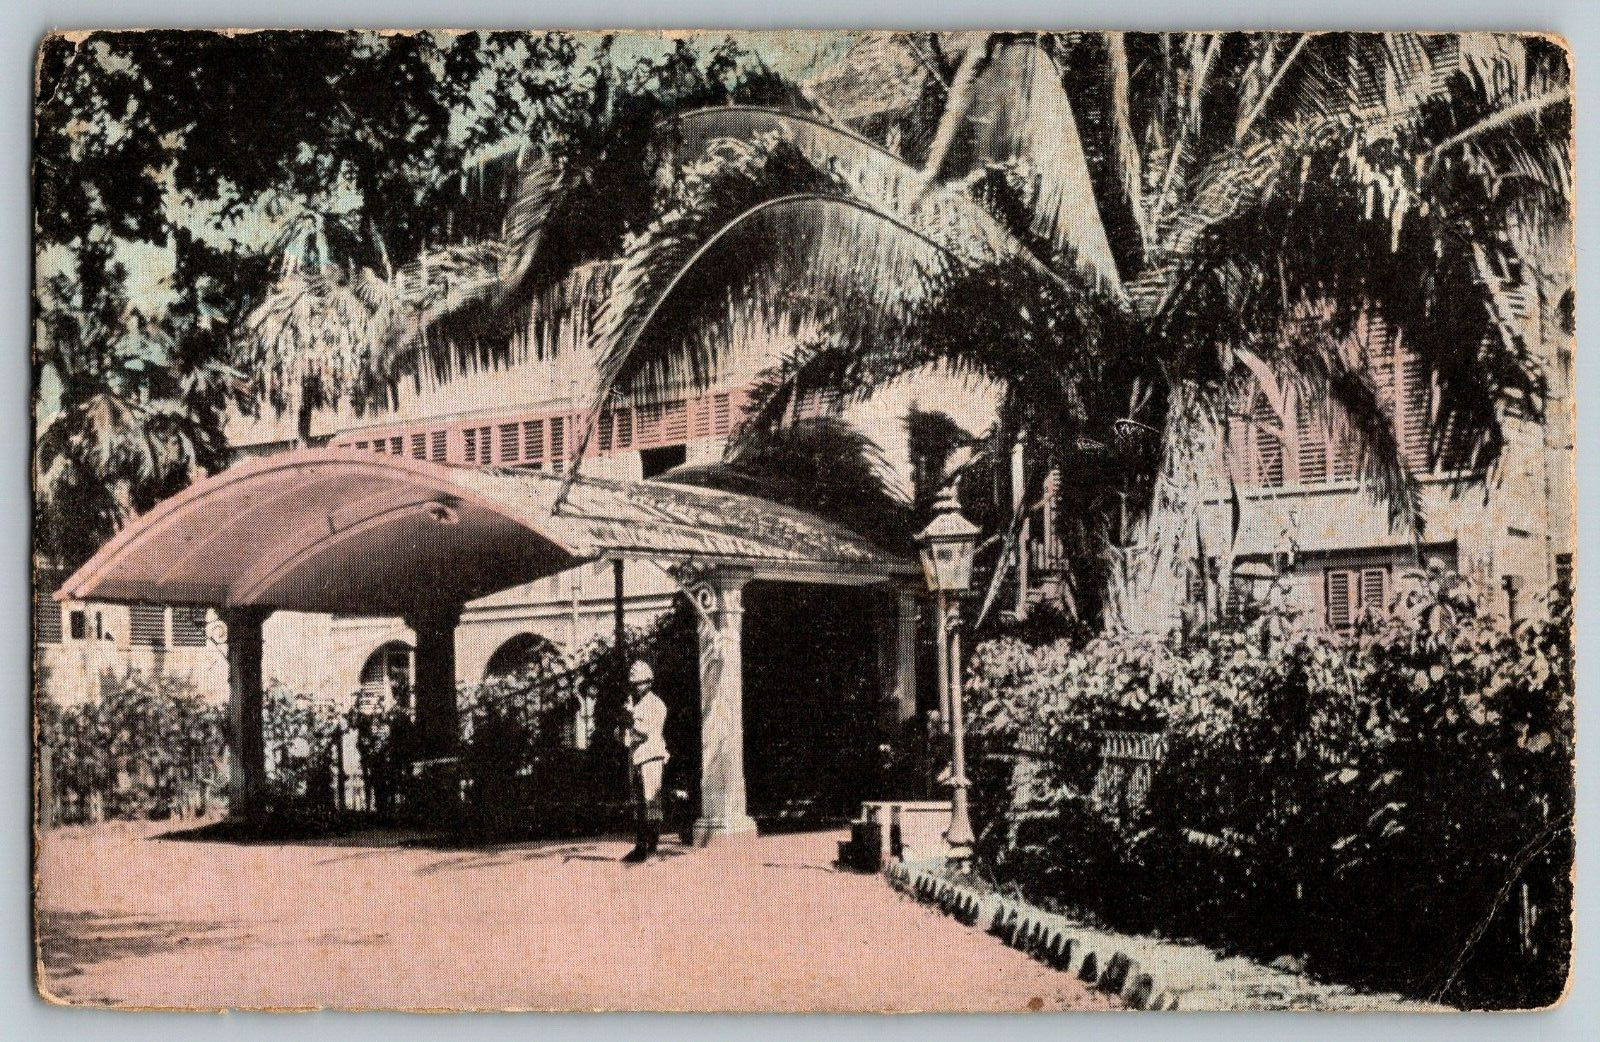 King's House, Home of Governor, Kingston Jamaica - Vintage Postcard - Unposted